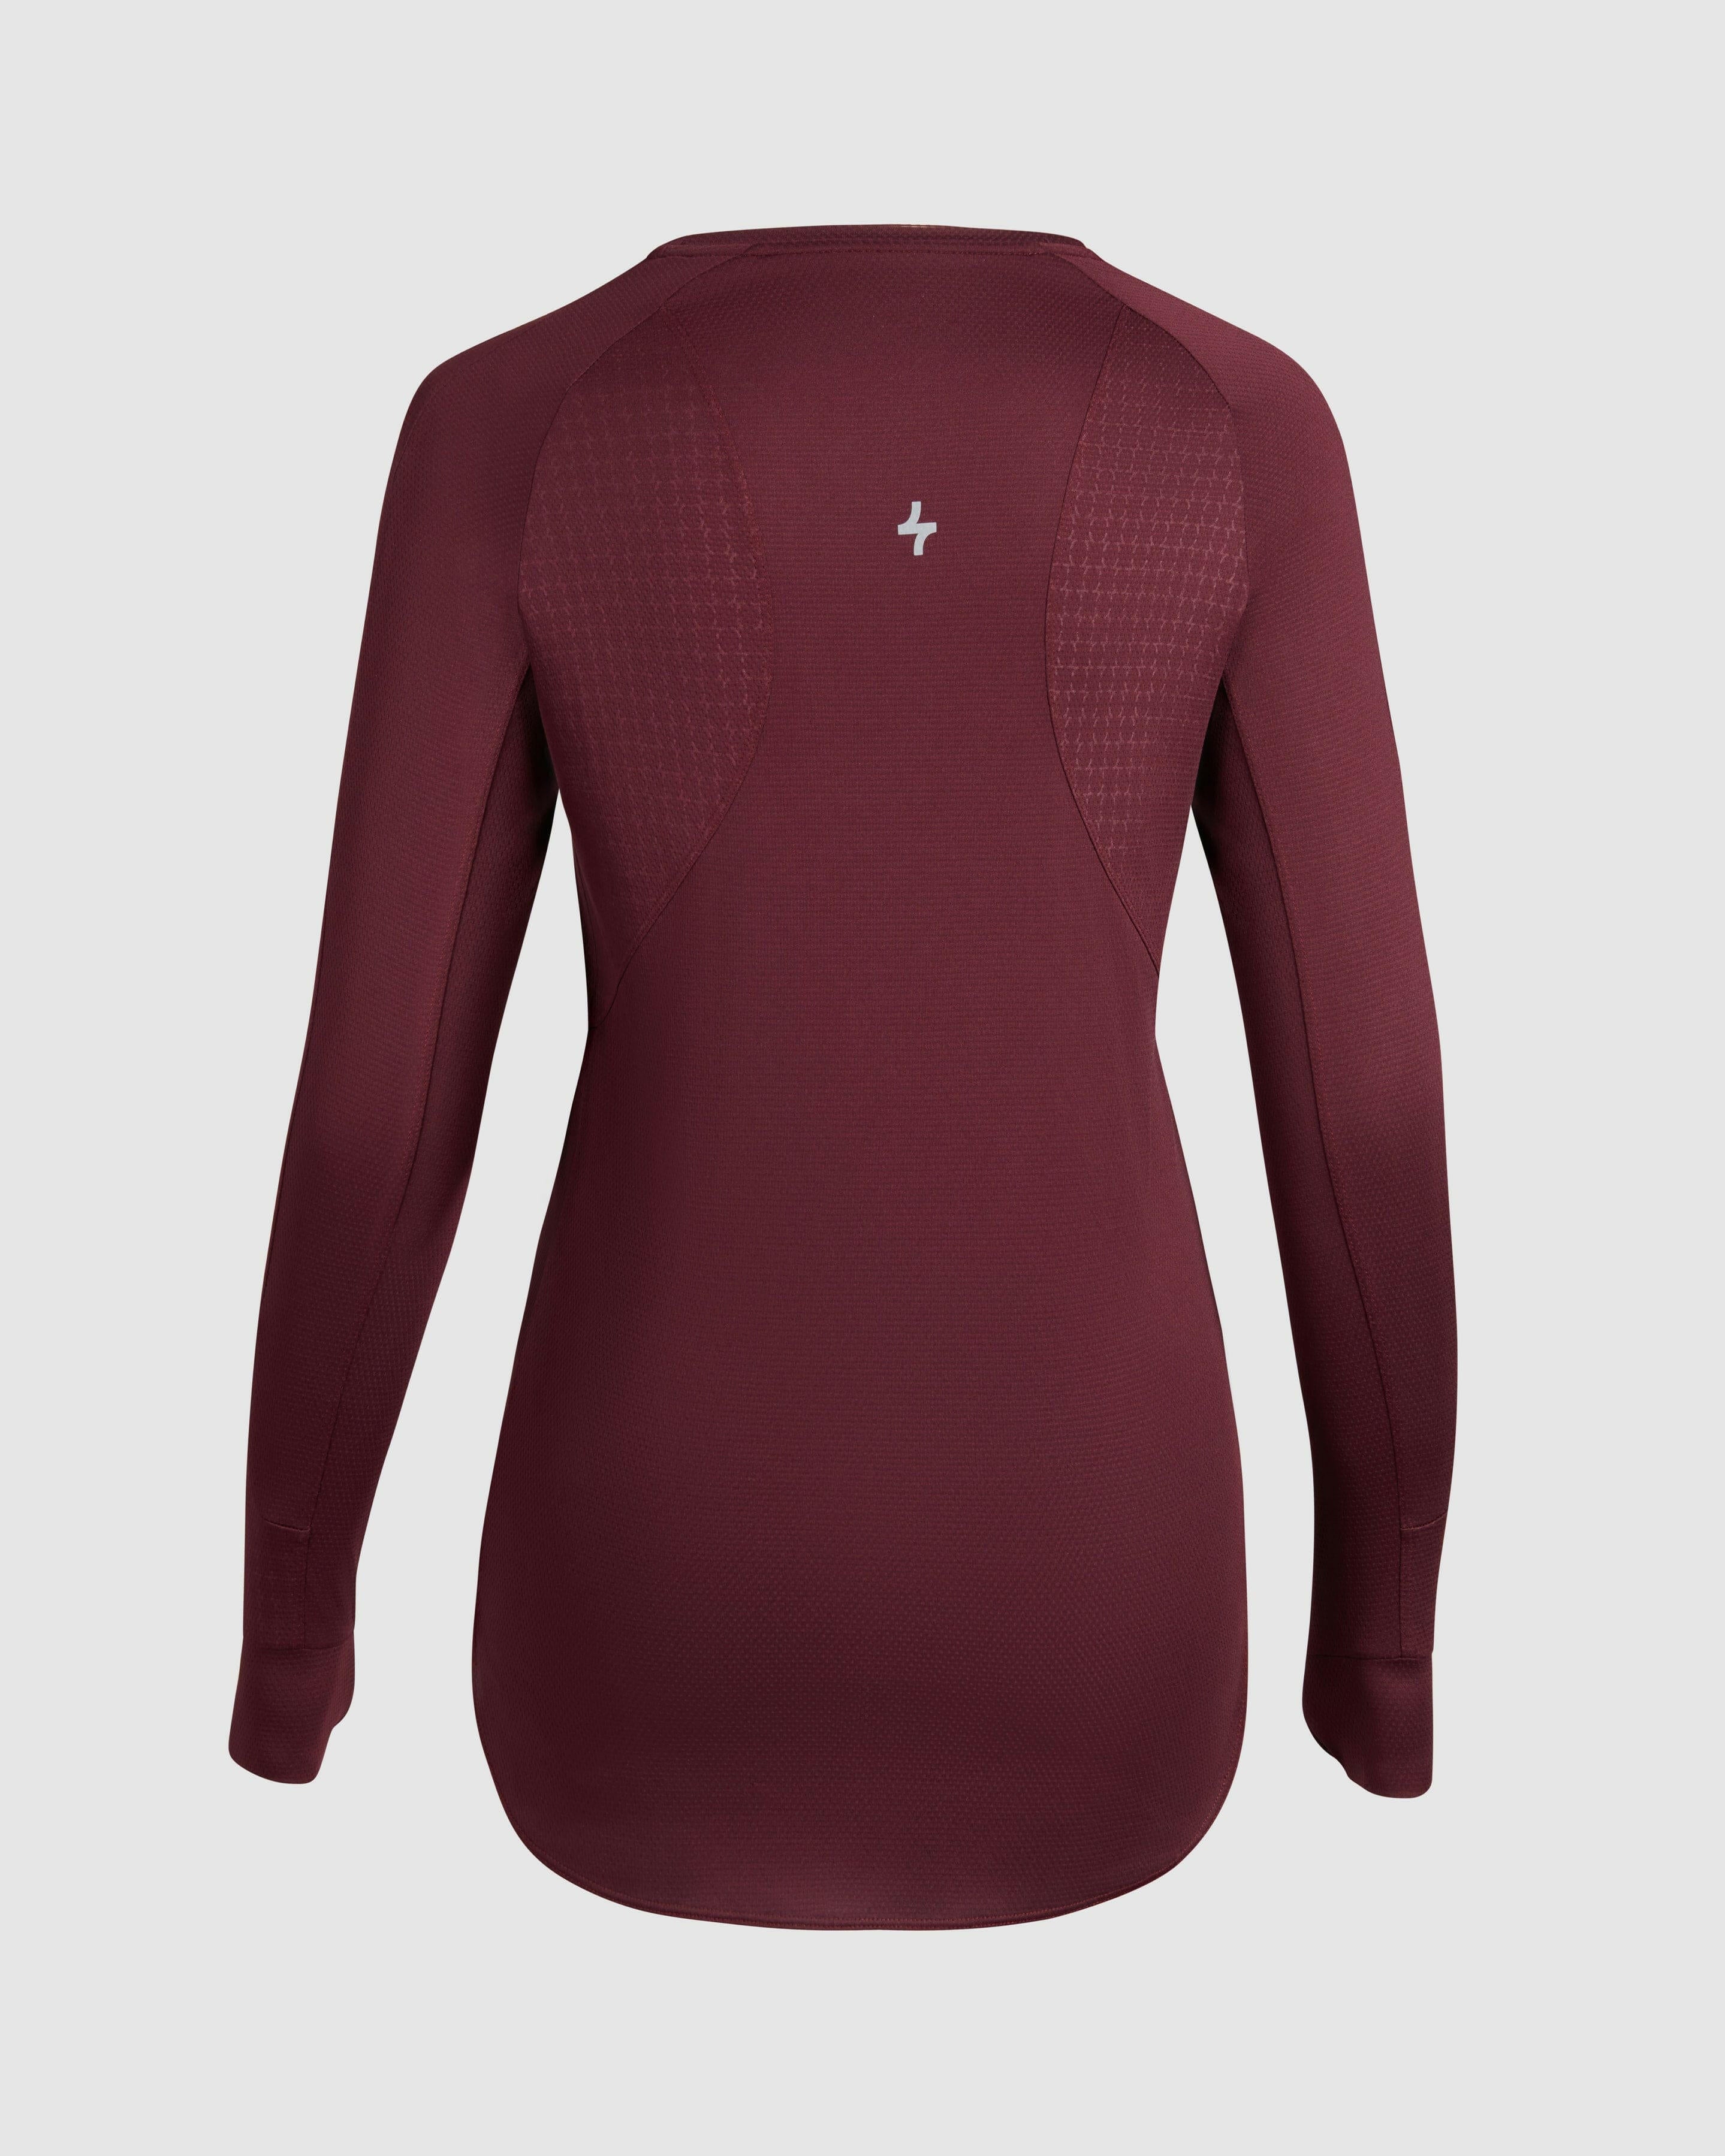 Qynda ACT LONG SLEEVE T-SHIRT athletic top with breathable mesh panels on the back, perfect for your sports wardrobe.